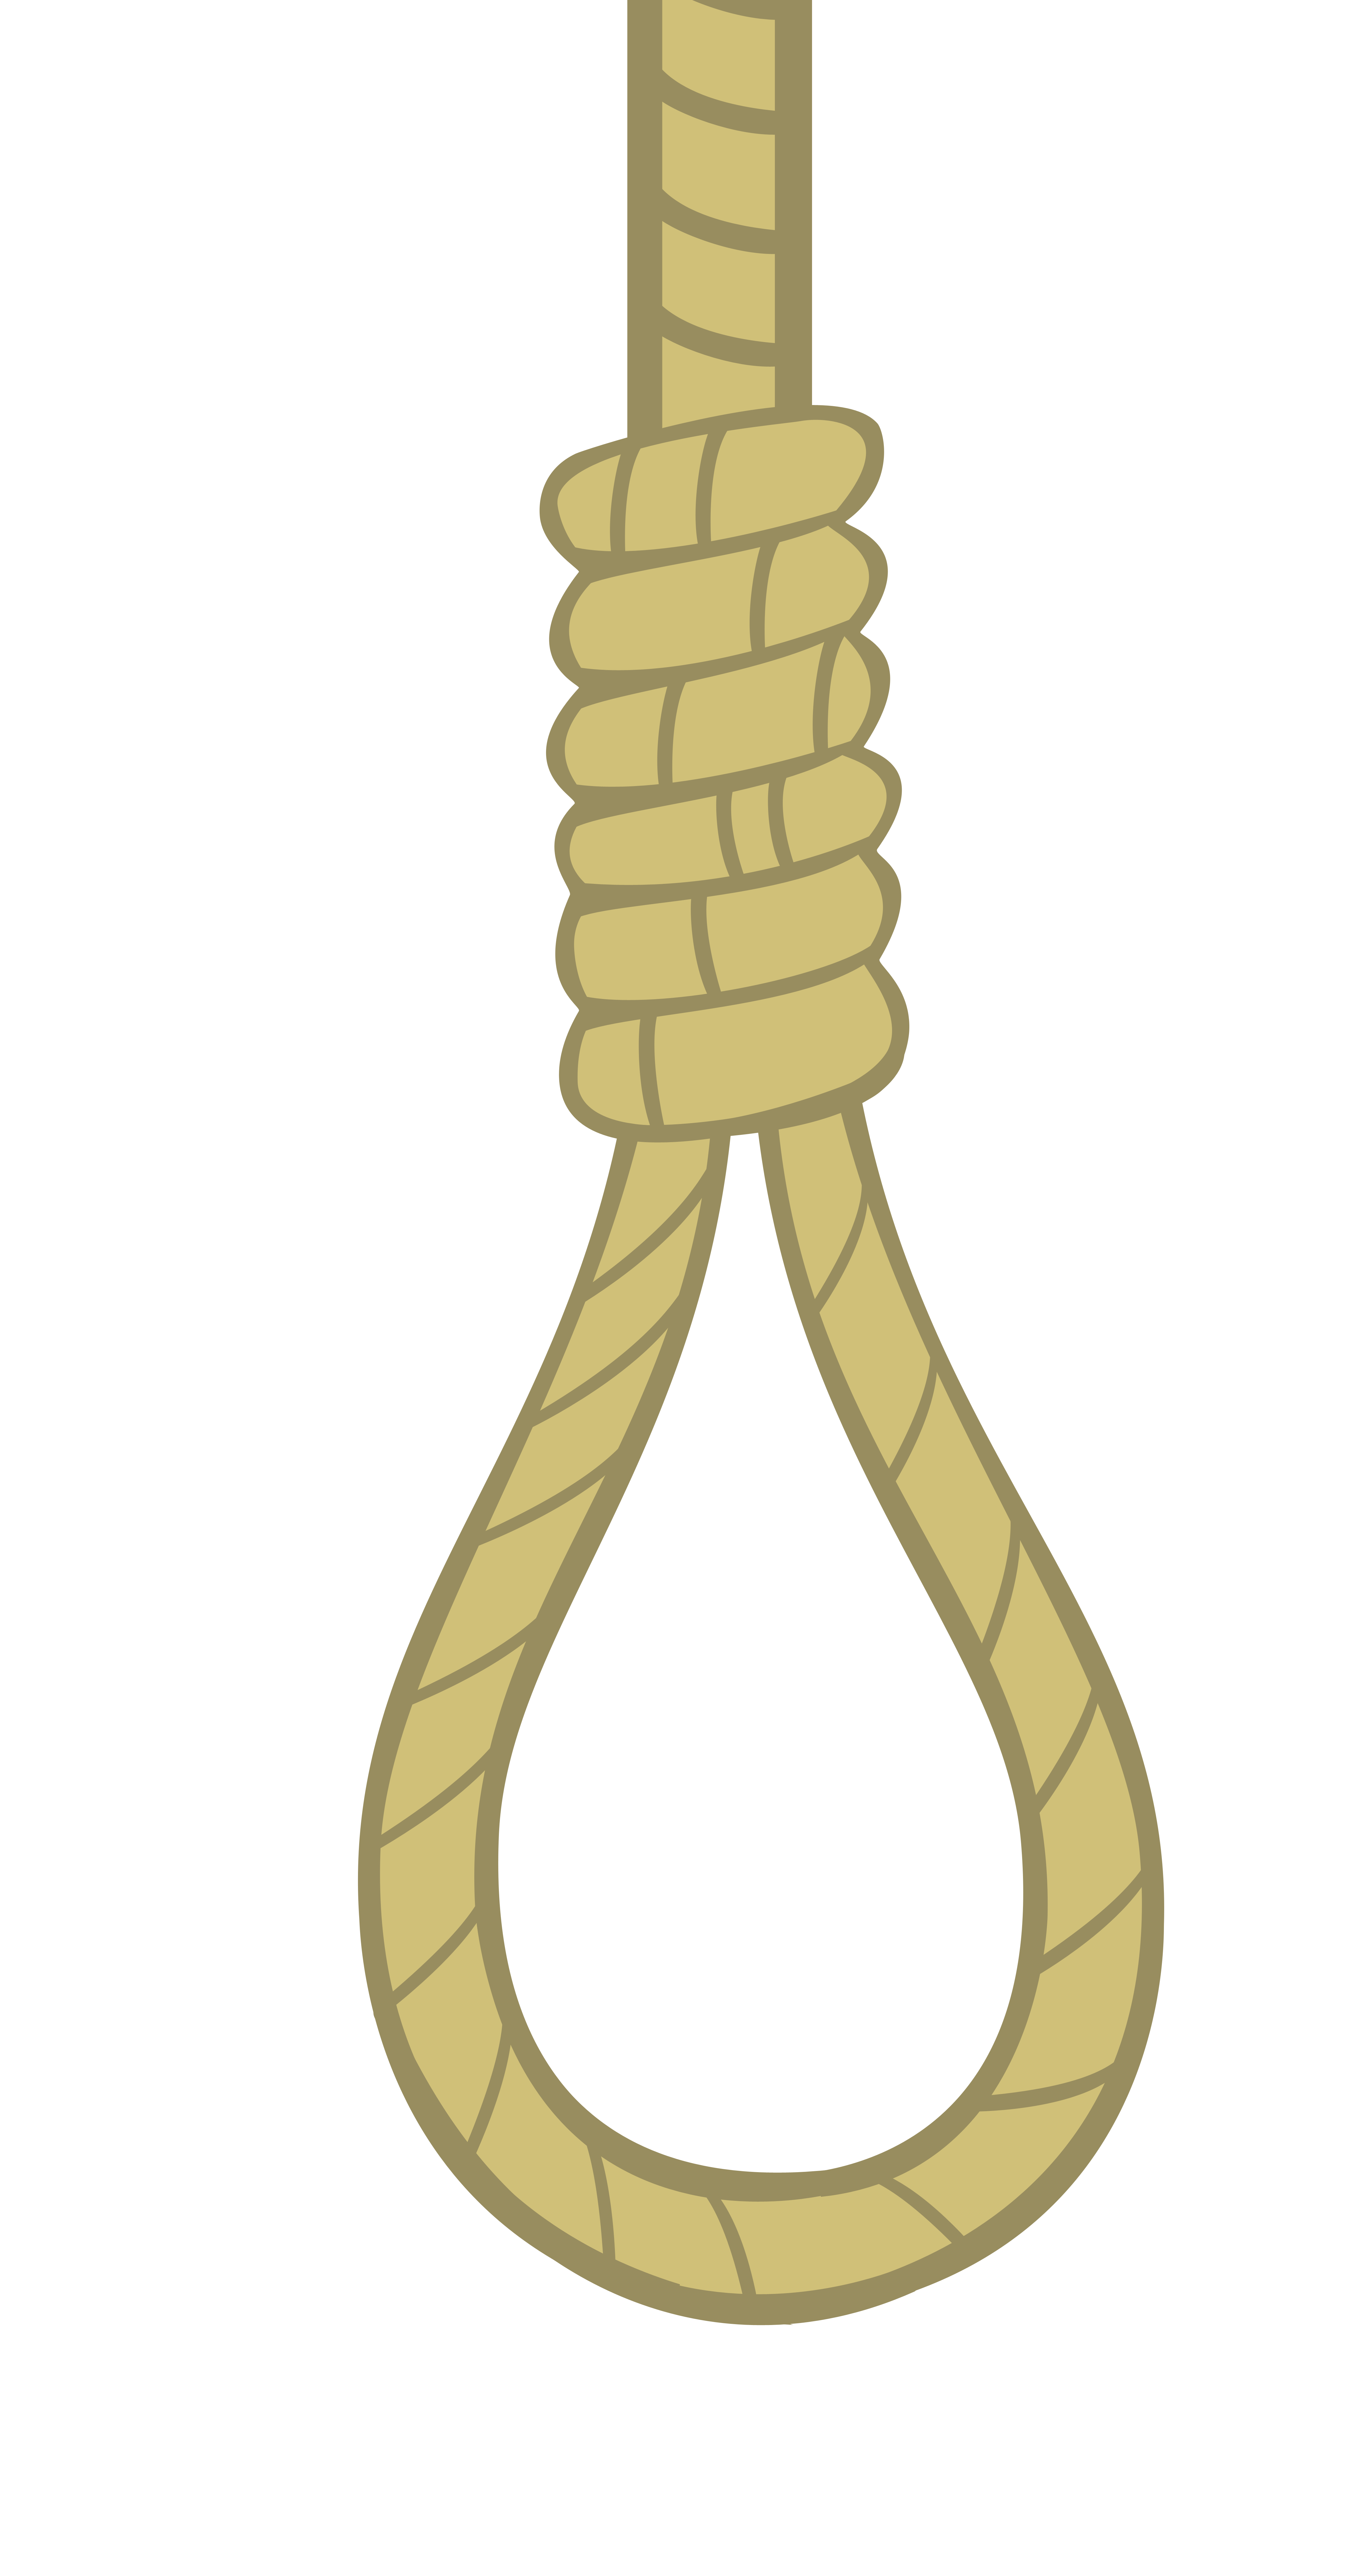 Noose By Sofunnyguy On ..